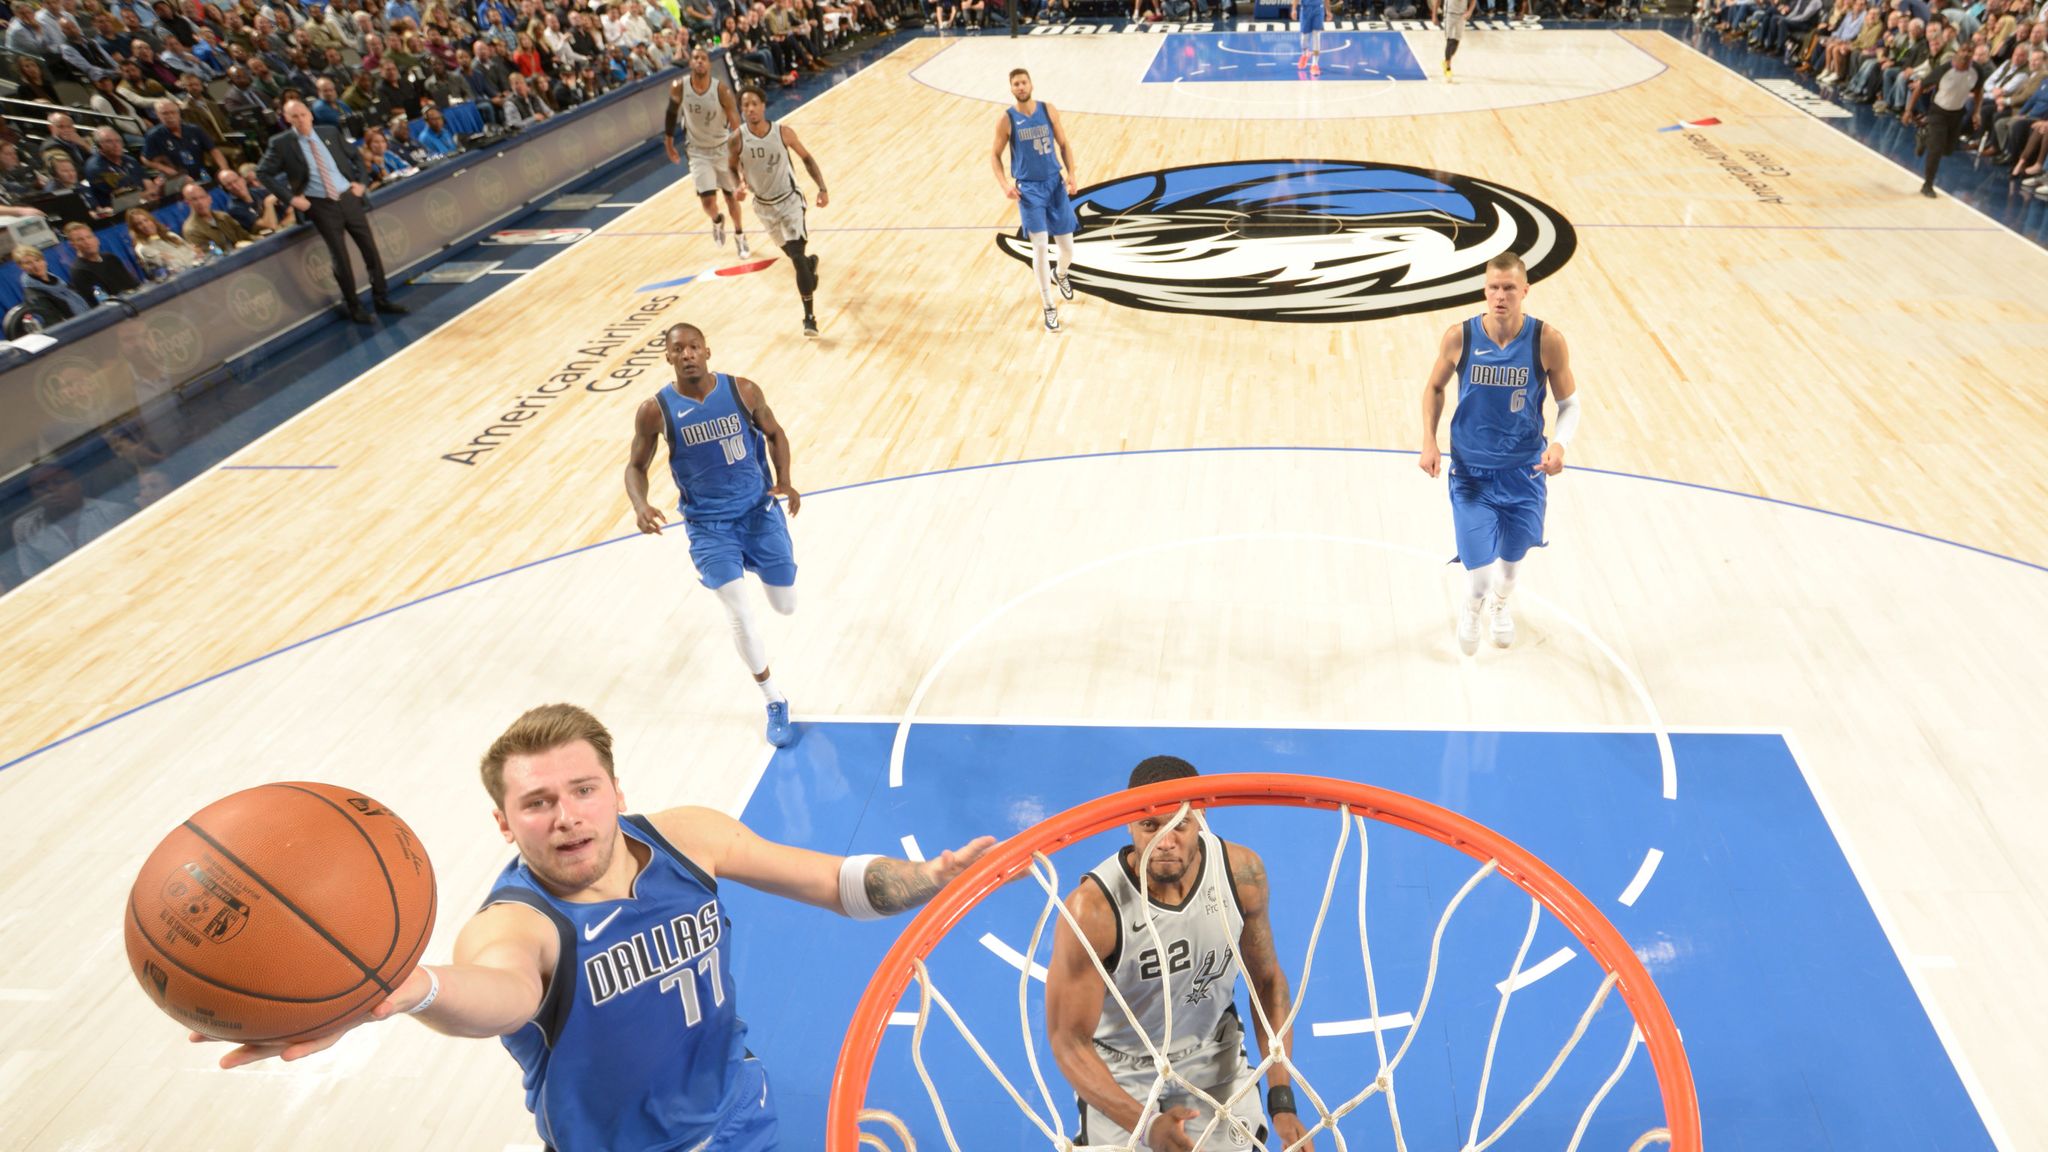 Luka Doncic is the first player in NBA history with 95 points, 20